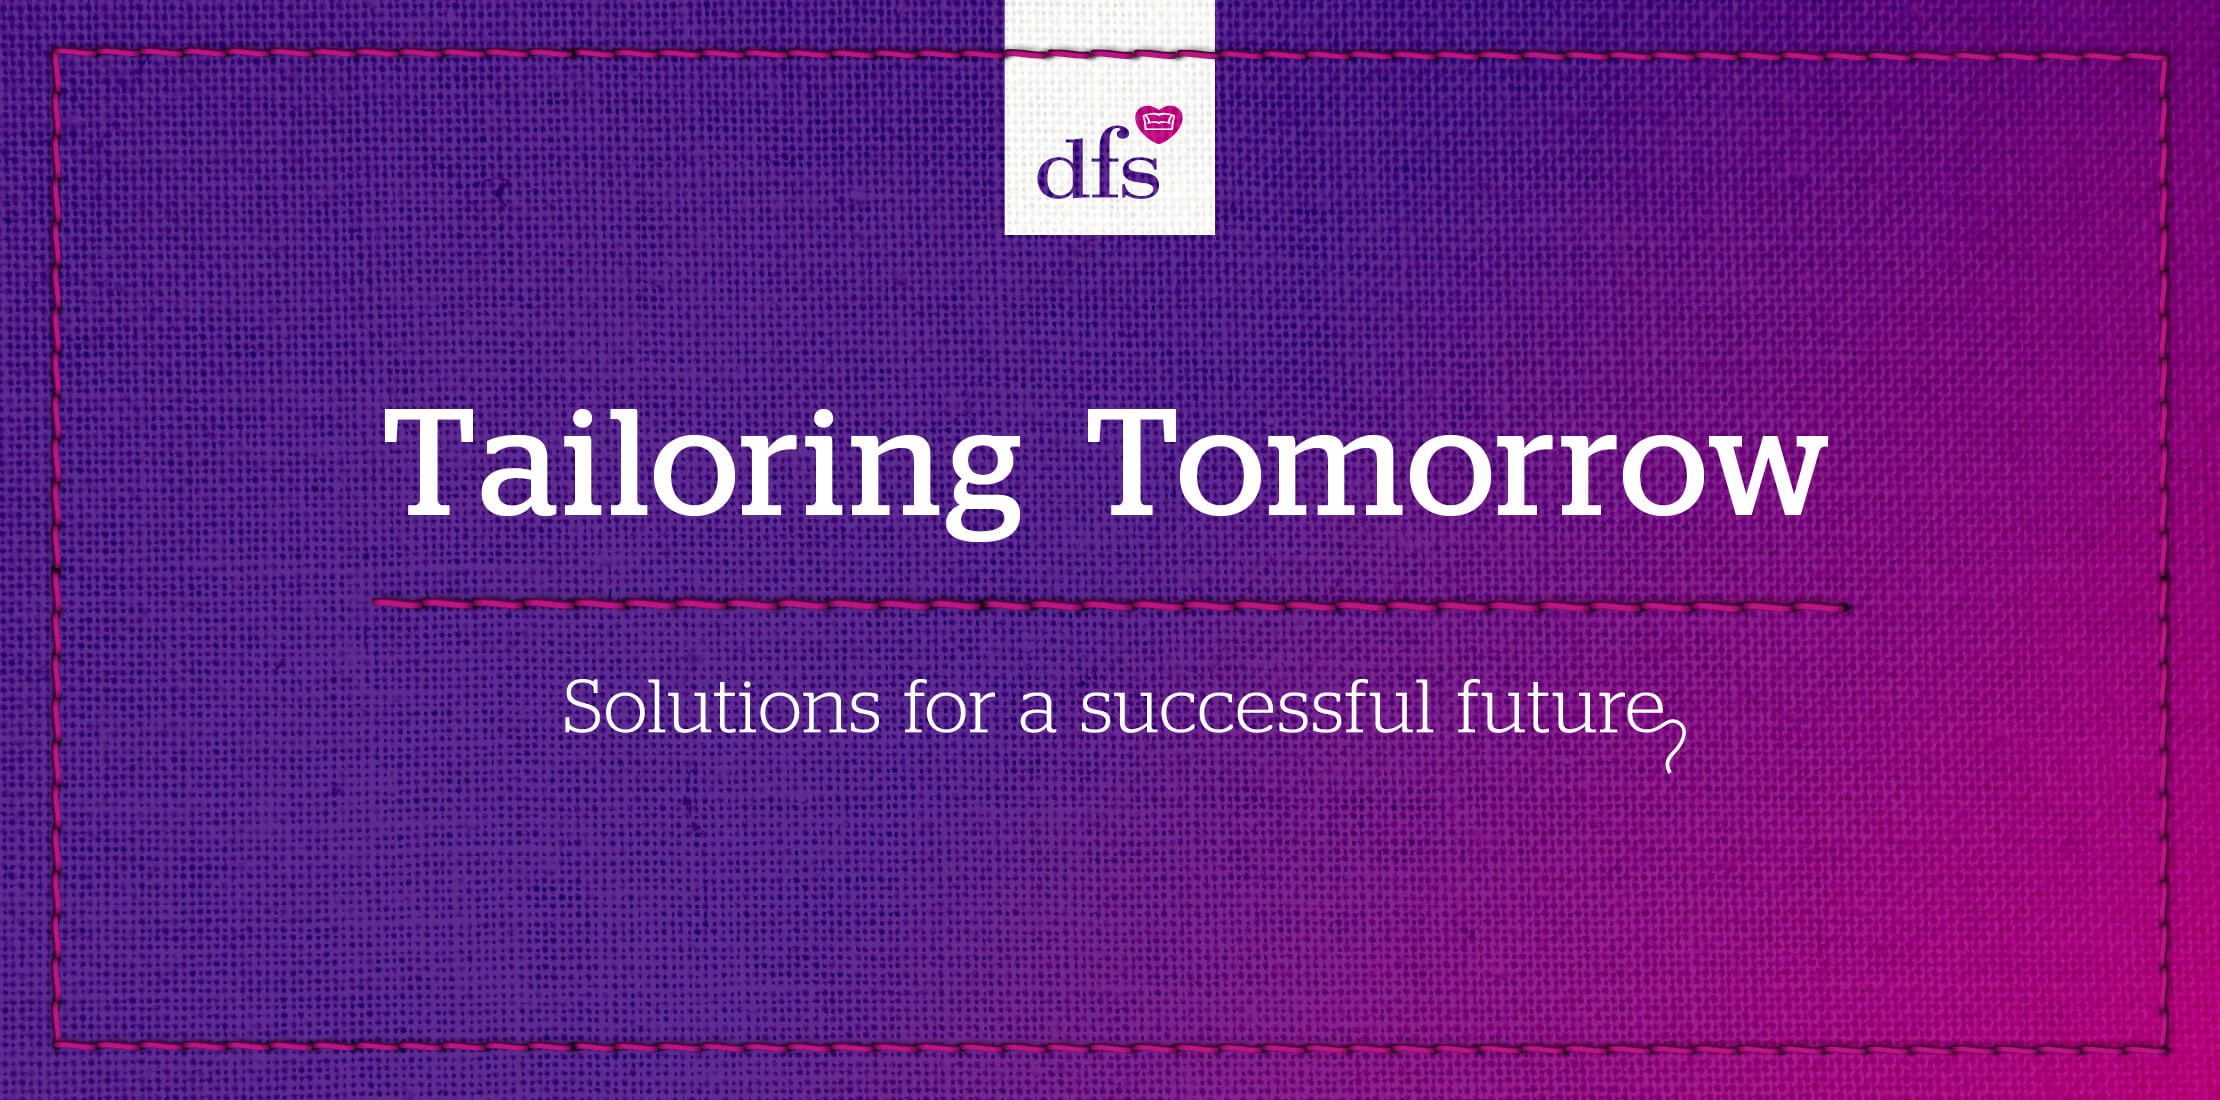 Main 'Tailoring Tomorrow' logo and accompanying tagline in white text, stitched into a purple and pink fabric background